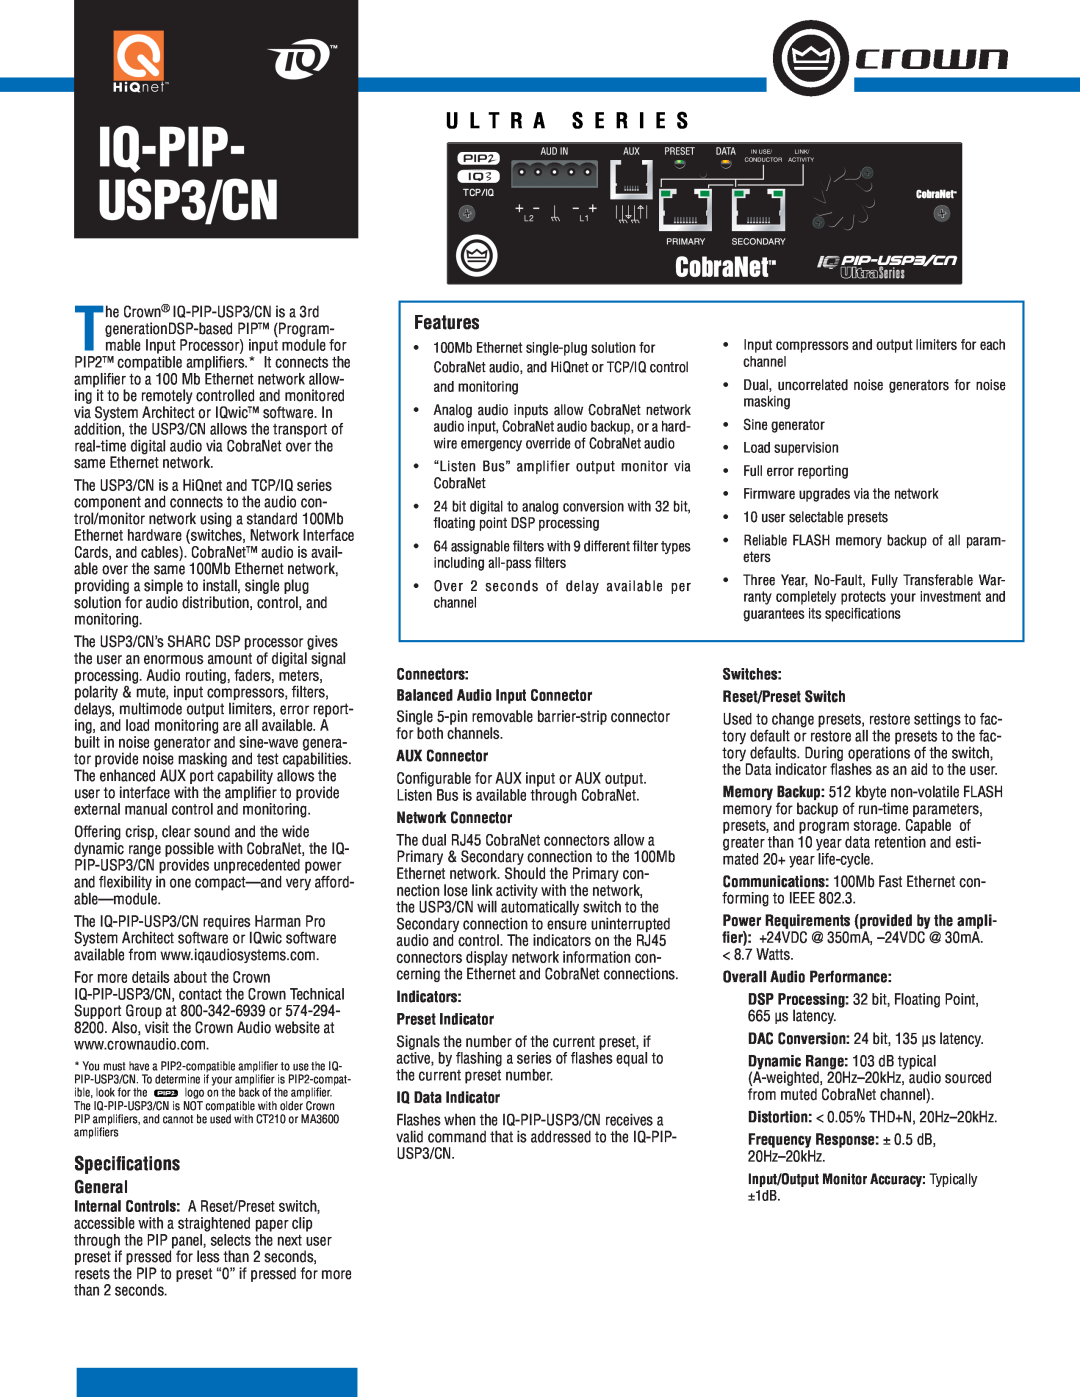 Crown Audio IQ-PIP USP3/CN specifications IQ-PIP-USP3/CN, Features, Speciﬁcations, U L T R A S E R I E S, General 